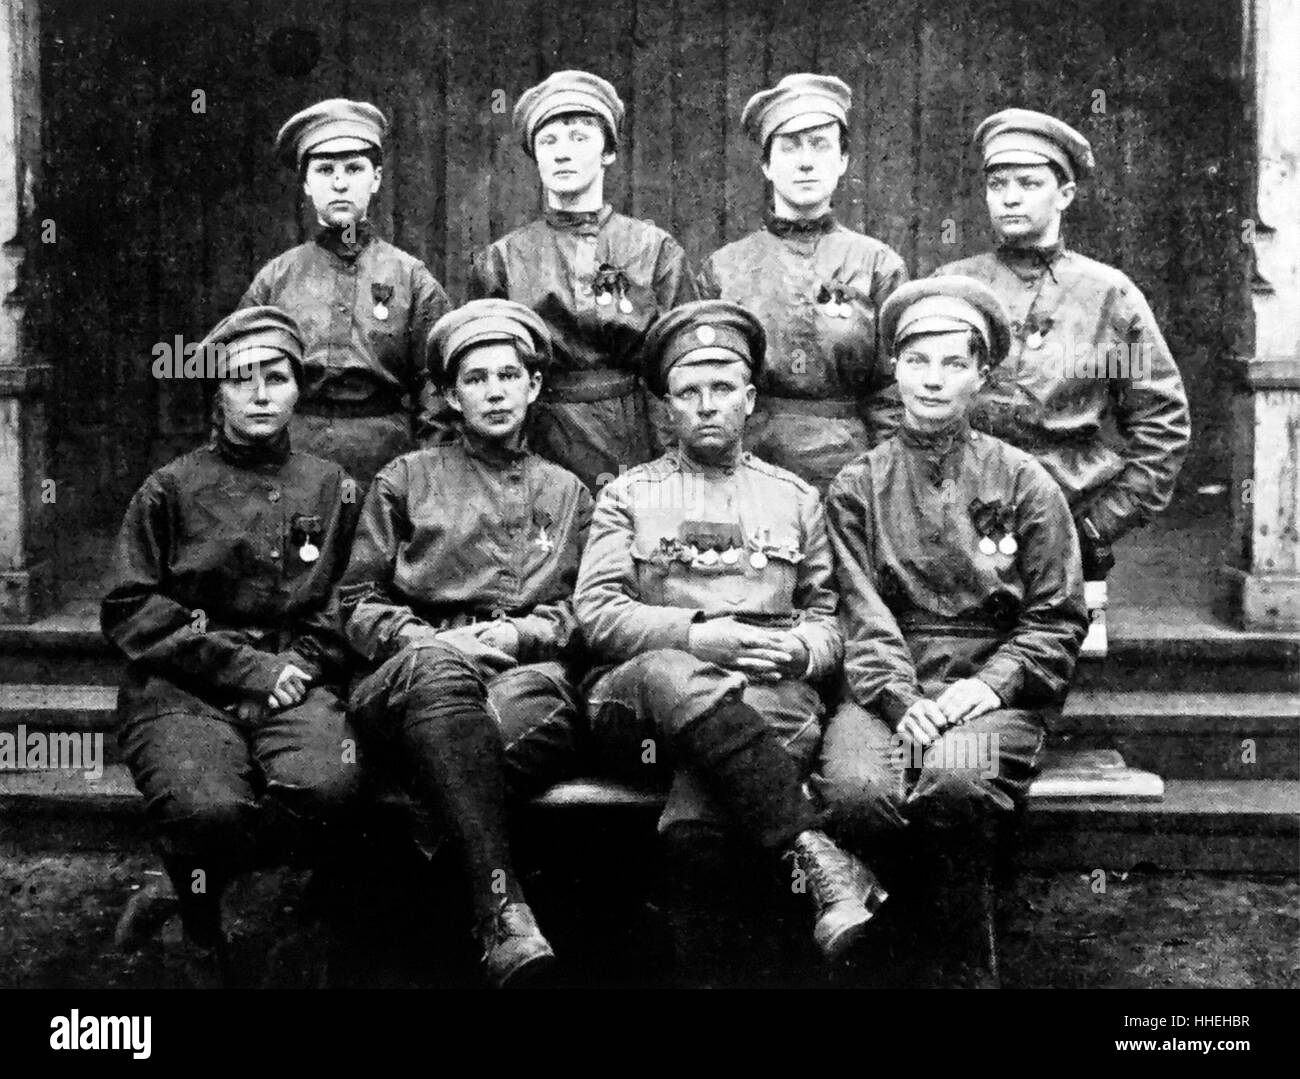 Photograph of the staff of Maria Leontievna Bochkareva (1889-1920) a Russian woman who fought in World War I and formed the Women's Battalion of Death. Dated 20th Century Stock Photo